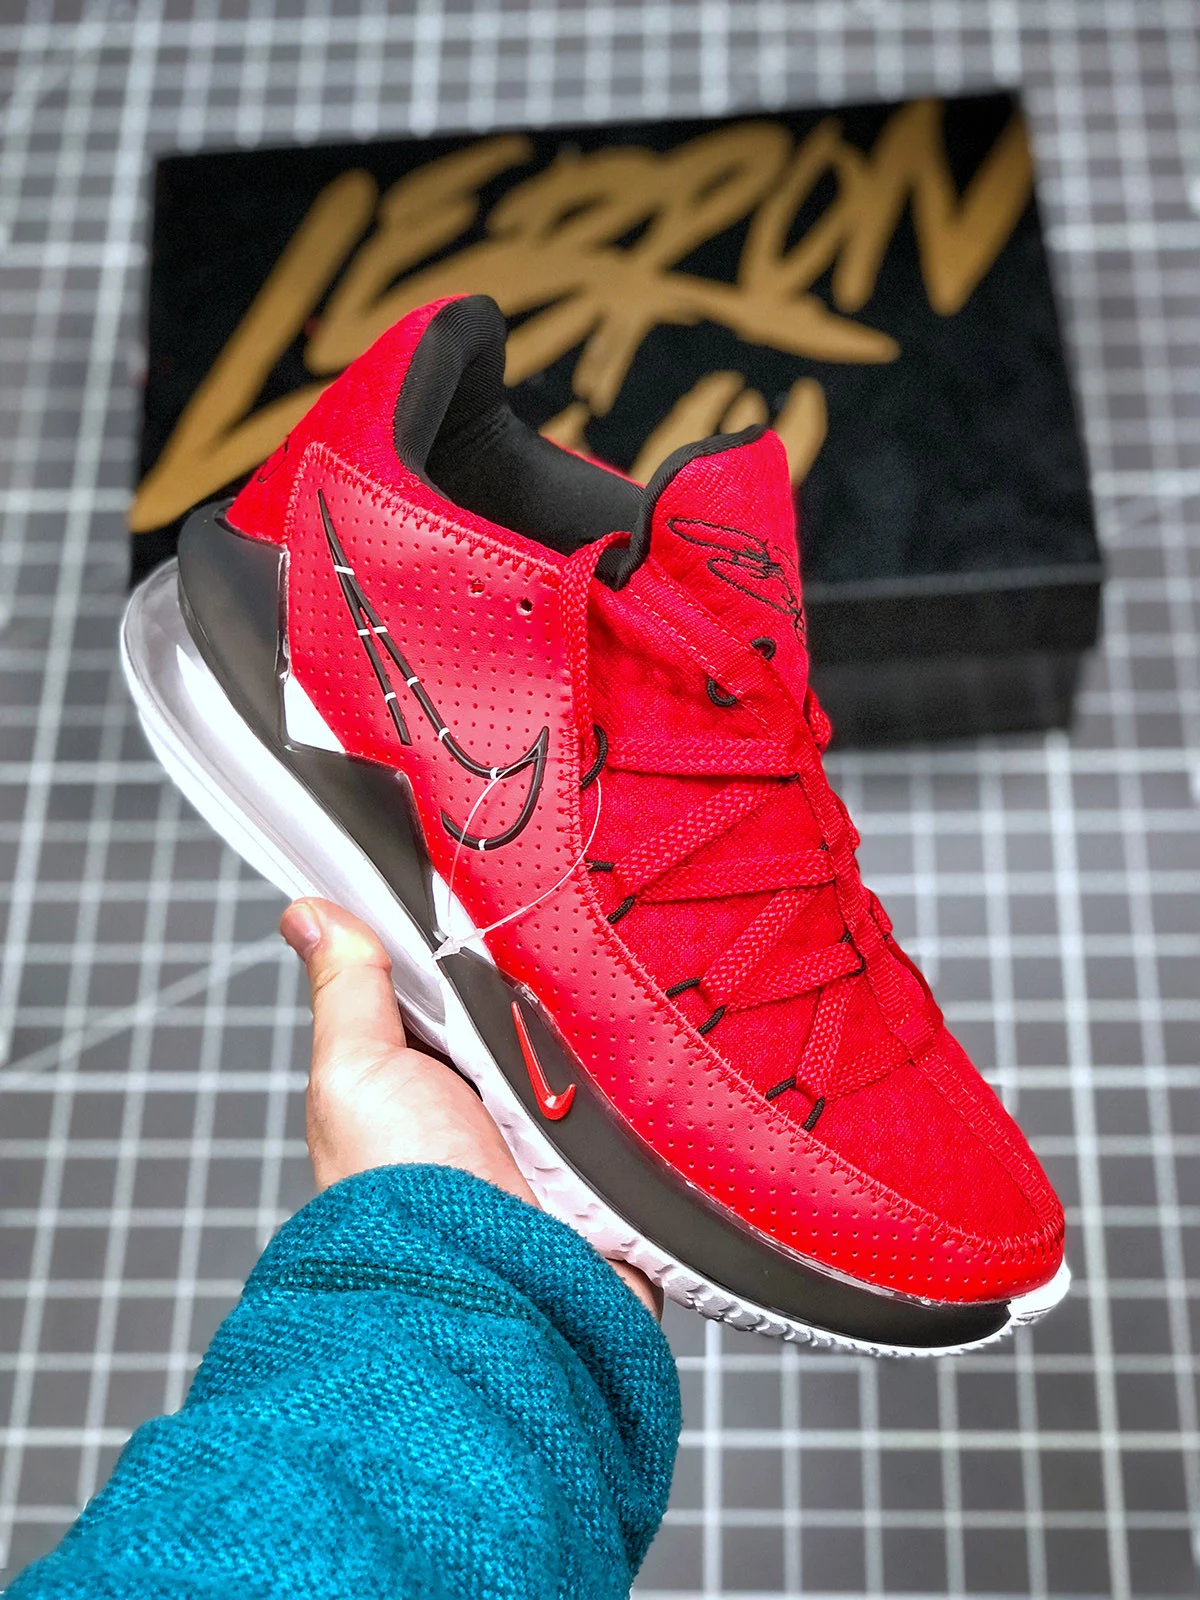 Nike LeBron 17 Low Red Black For Sale